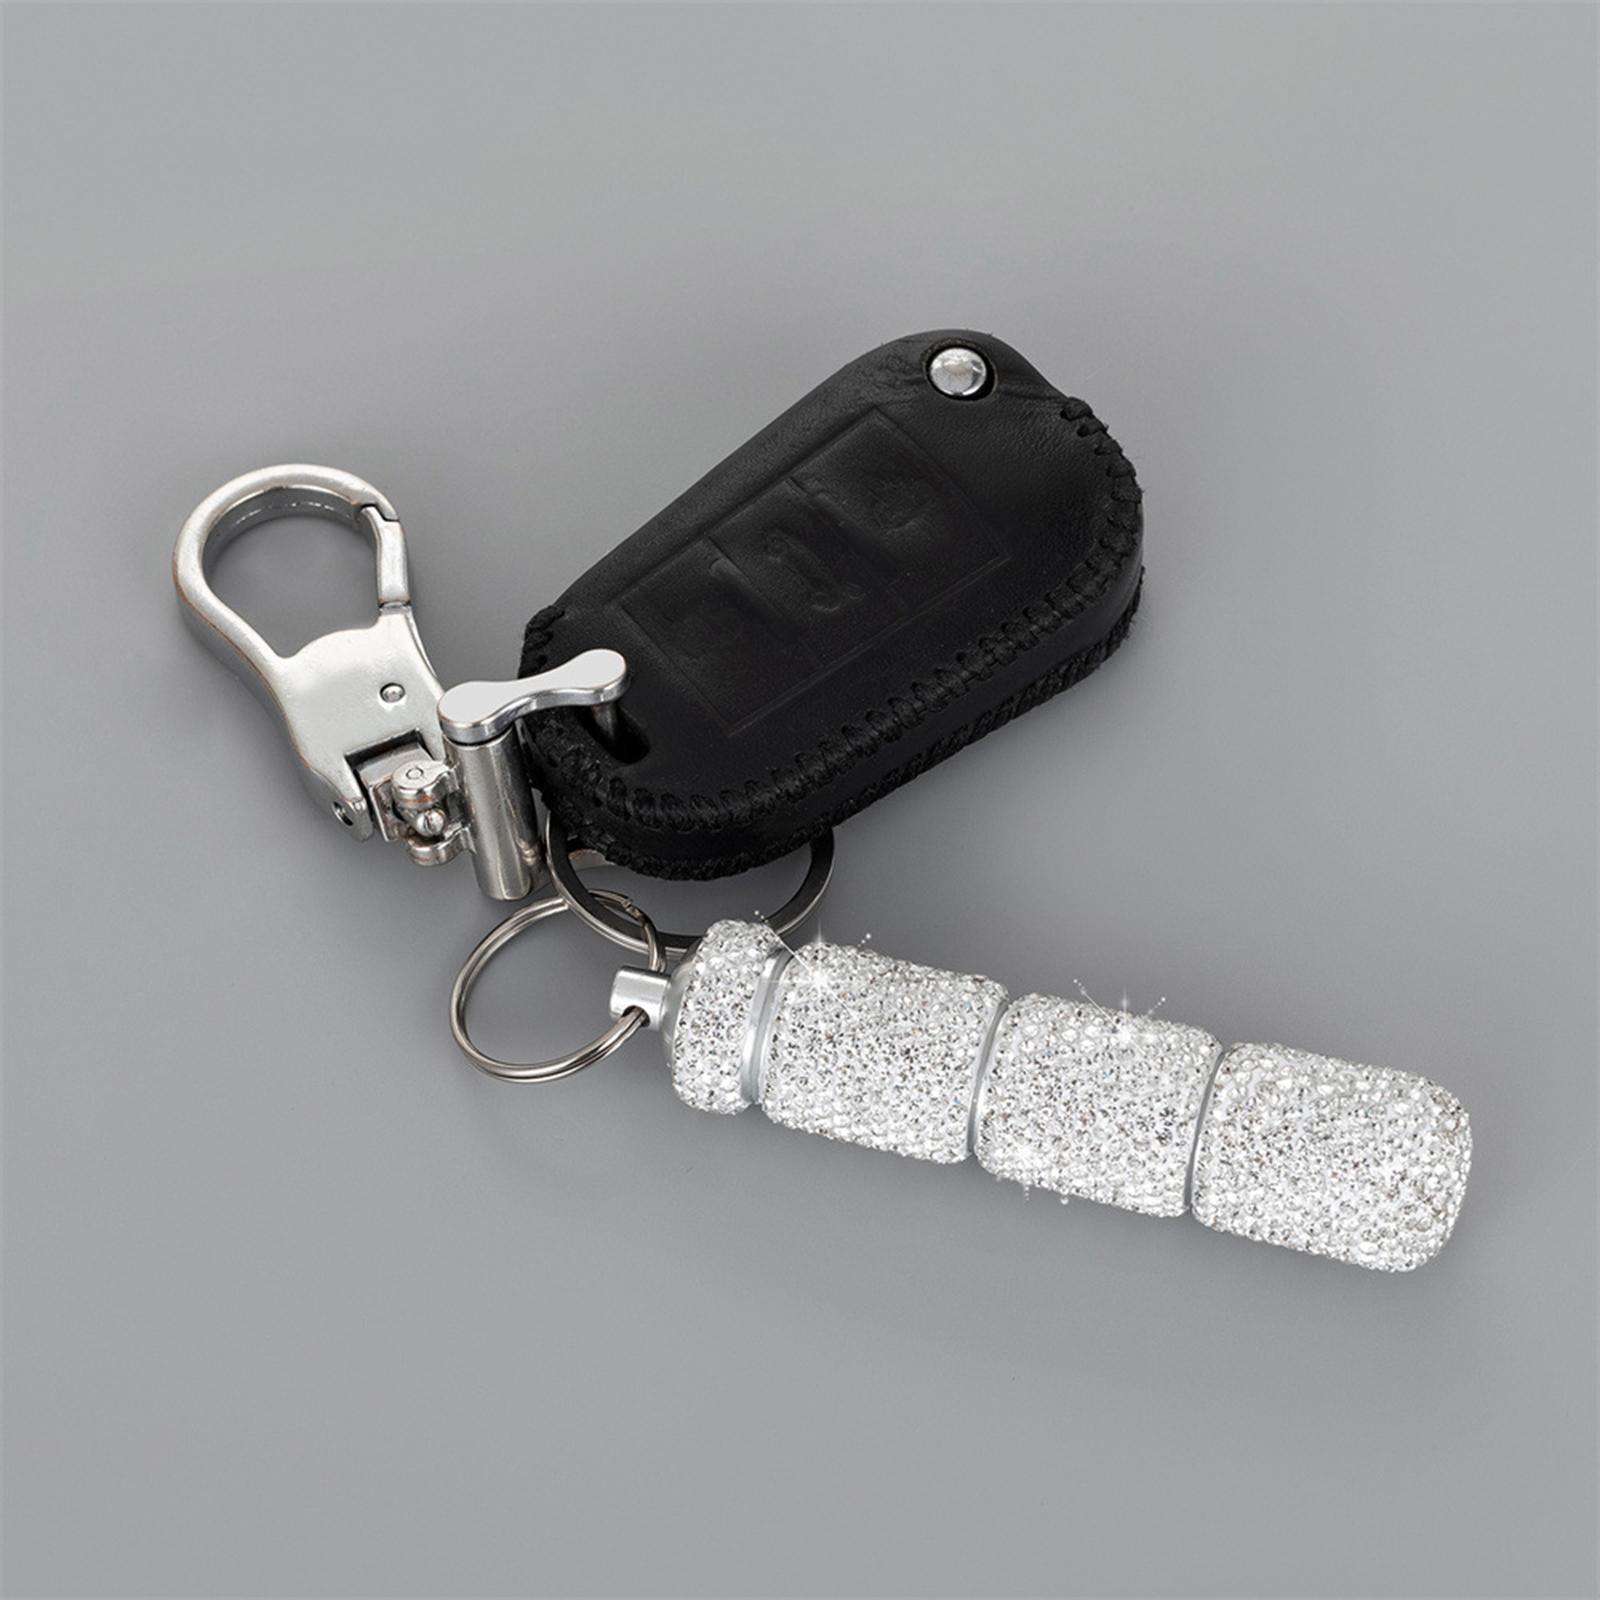 Tablet Box Keychain Sturdy Compact Keyring Tablet Case for Outside Pocket Office